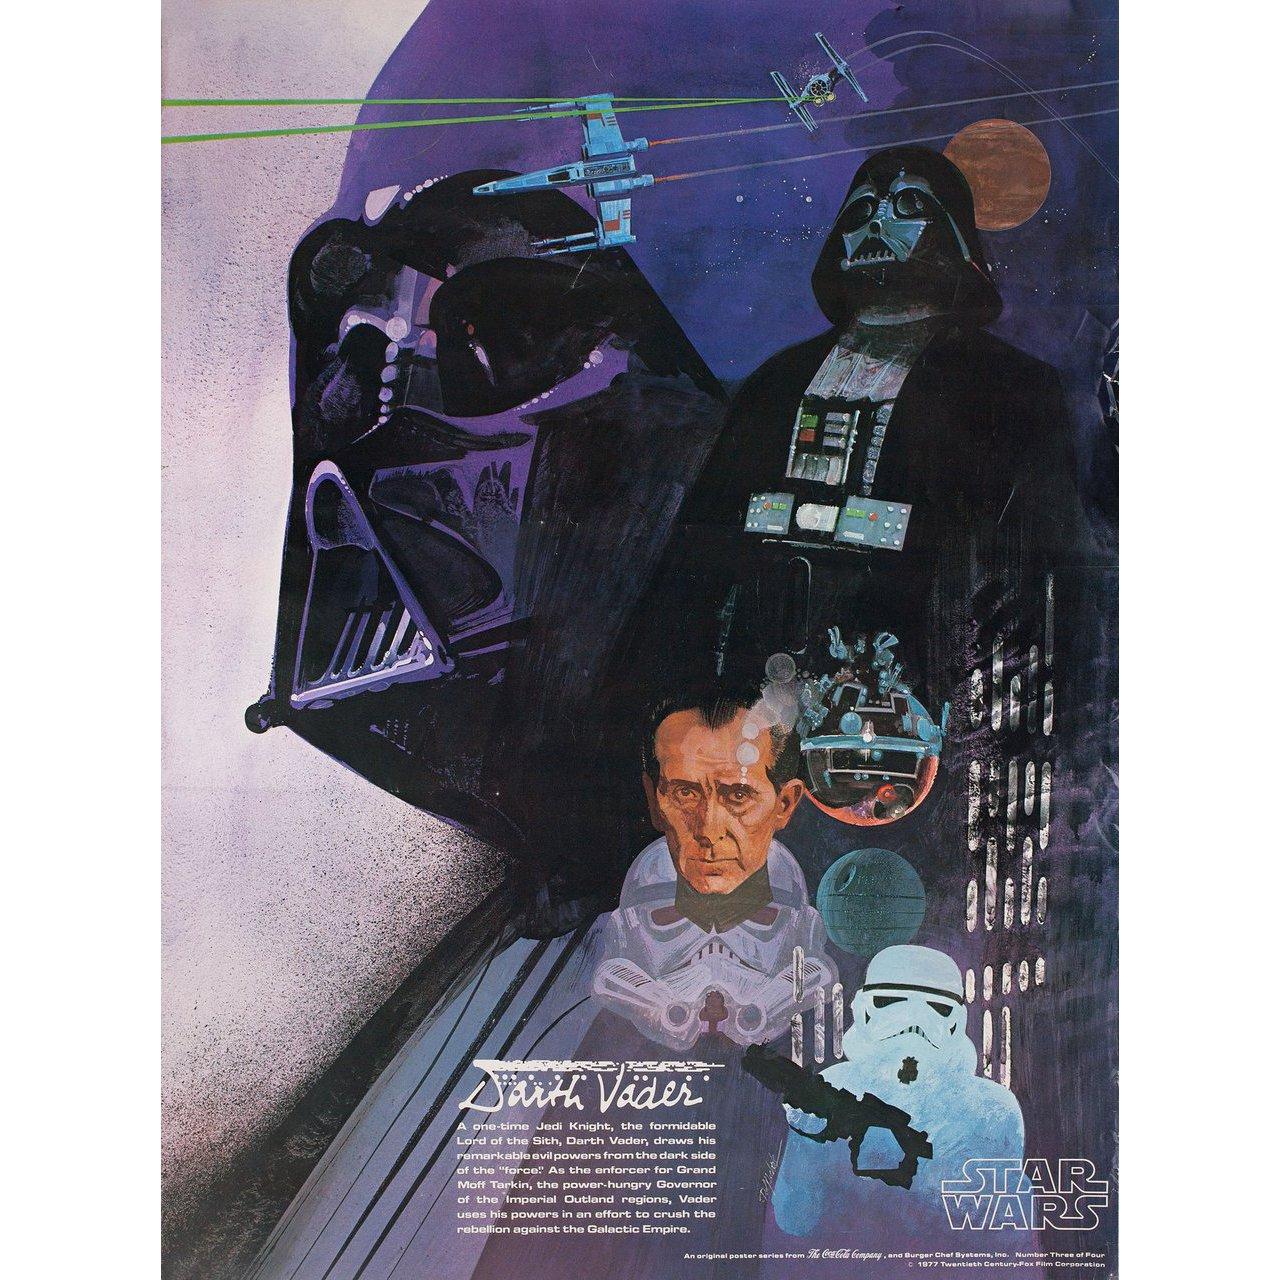 Original 1977 U.S. poster by Del Nichols for the film Star Wars (A New Hope) directed by George Lucas with Mark Hamill / Harrison Ford / Carrie Fisher / Alec Guinness / Peter Cushing. Very good-fine condition, rolled with edge wear. Please note: the